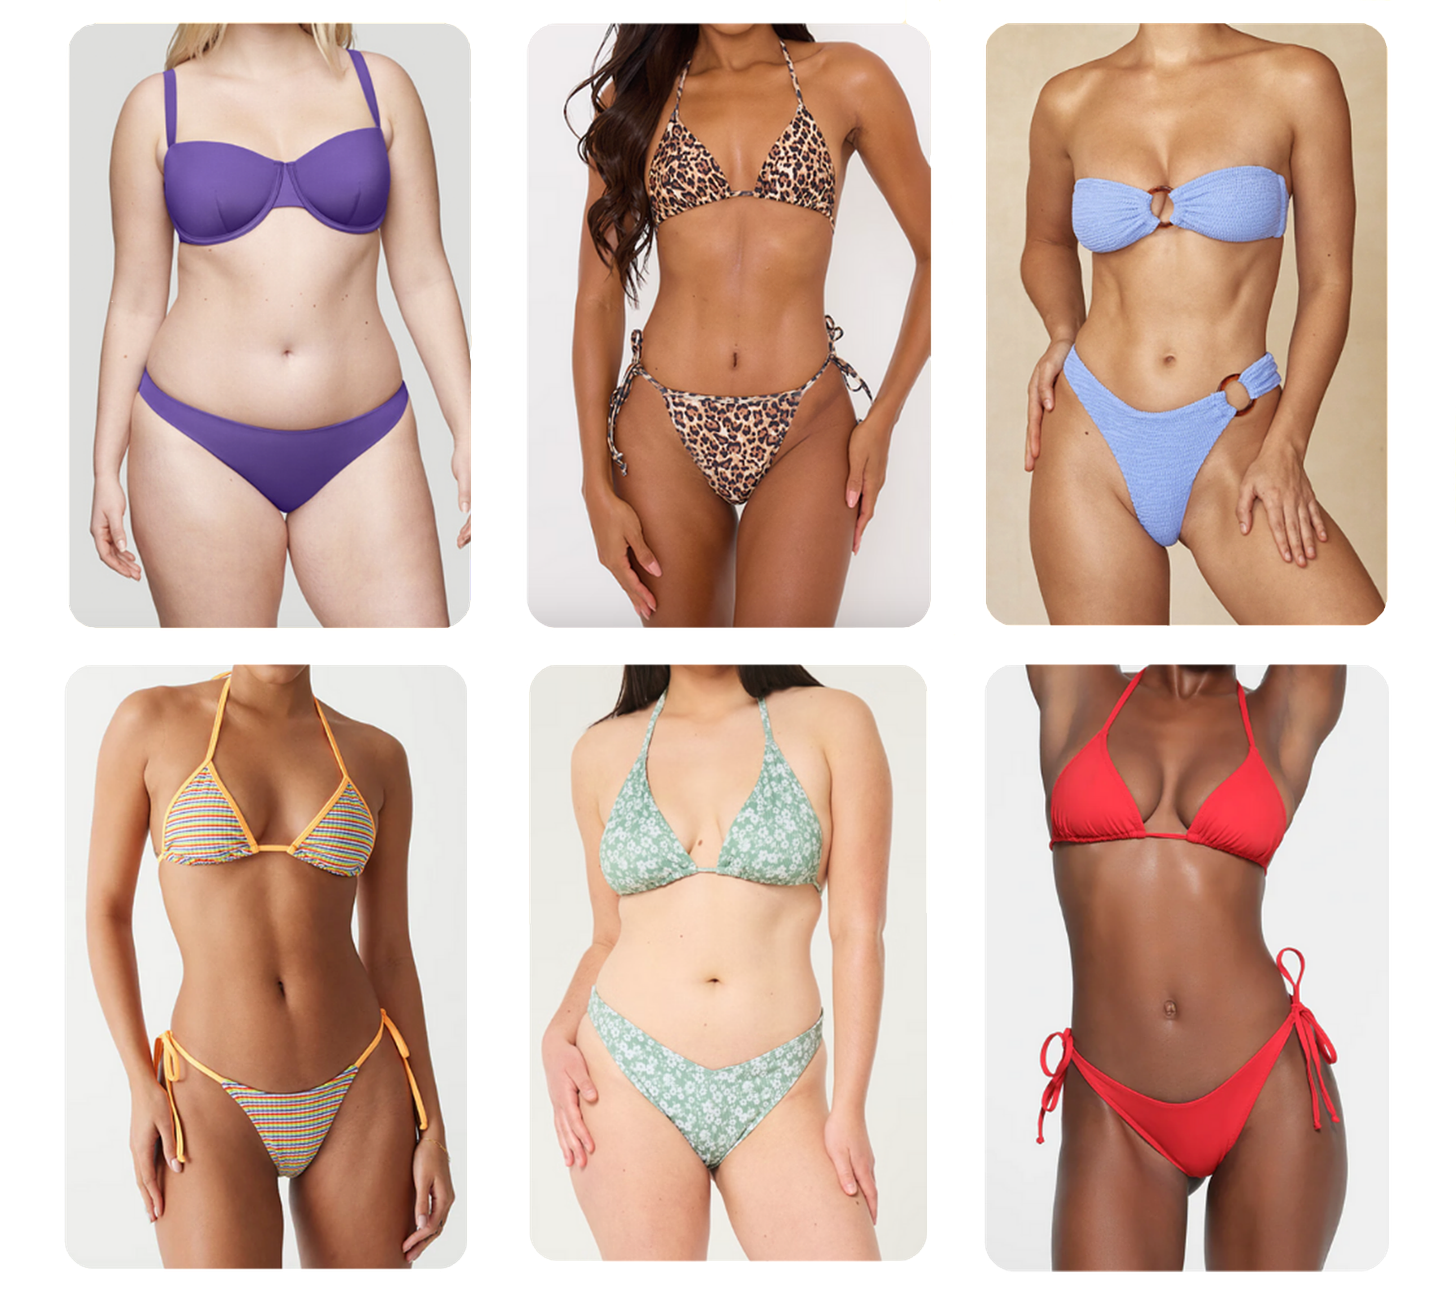 Images of skimpy bikinis from various brands.